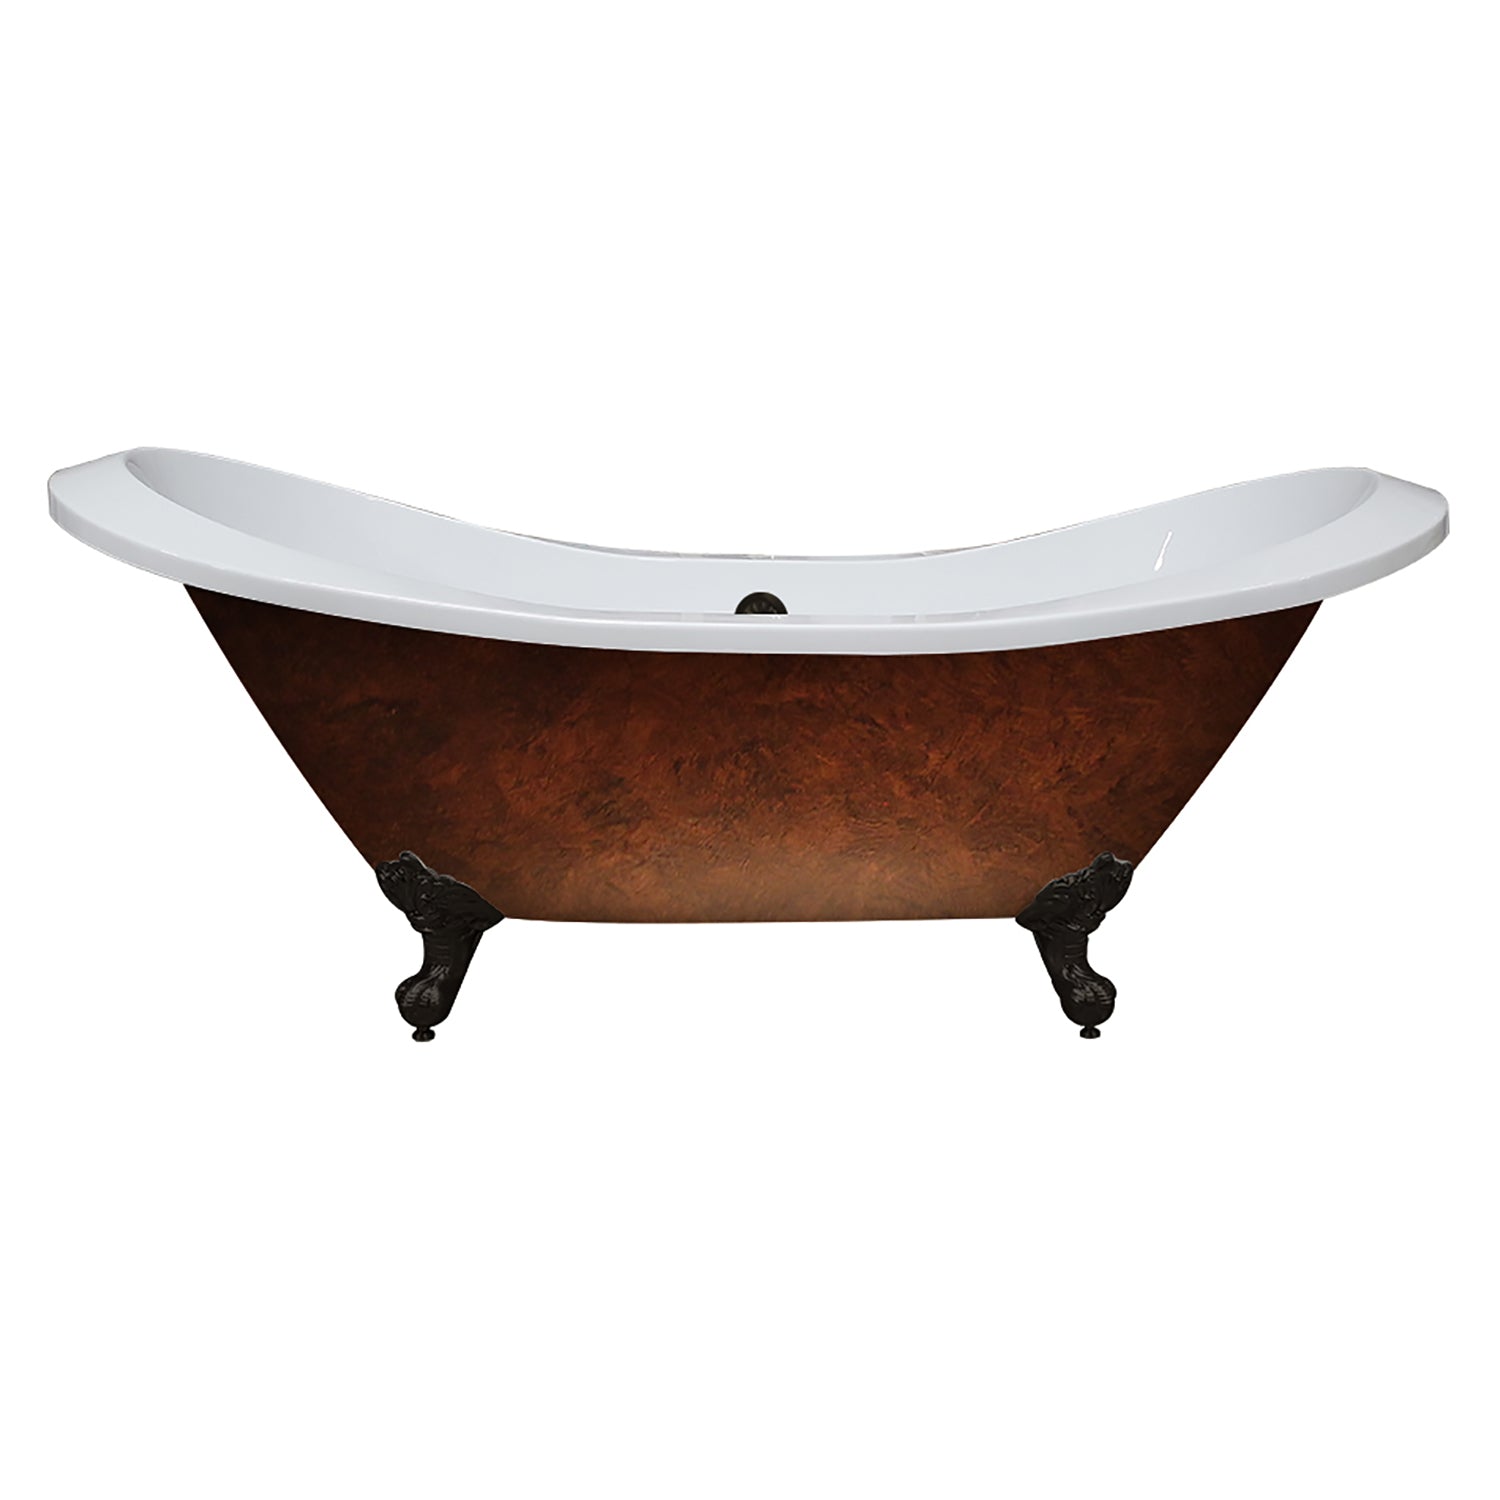 Cambridge Plumbing XL Double Slipper Hand Painted Copper Bronze Acrylic Clawfoot Tub (Fiberglass Core, Interior White Gloss Finish & Hand Painted Faux Copper Bronze Finish) with No Faucet Holes ADESXL-NH-ORB-CB - Vital Hydrotherapy